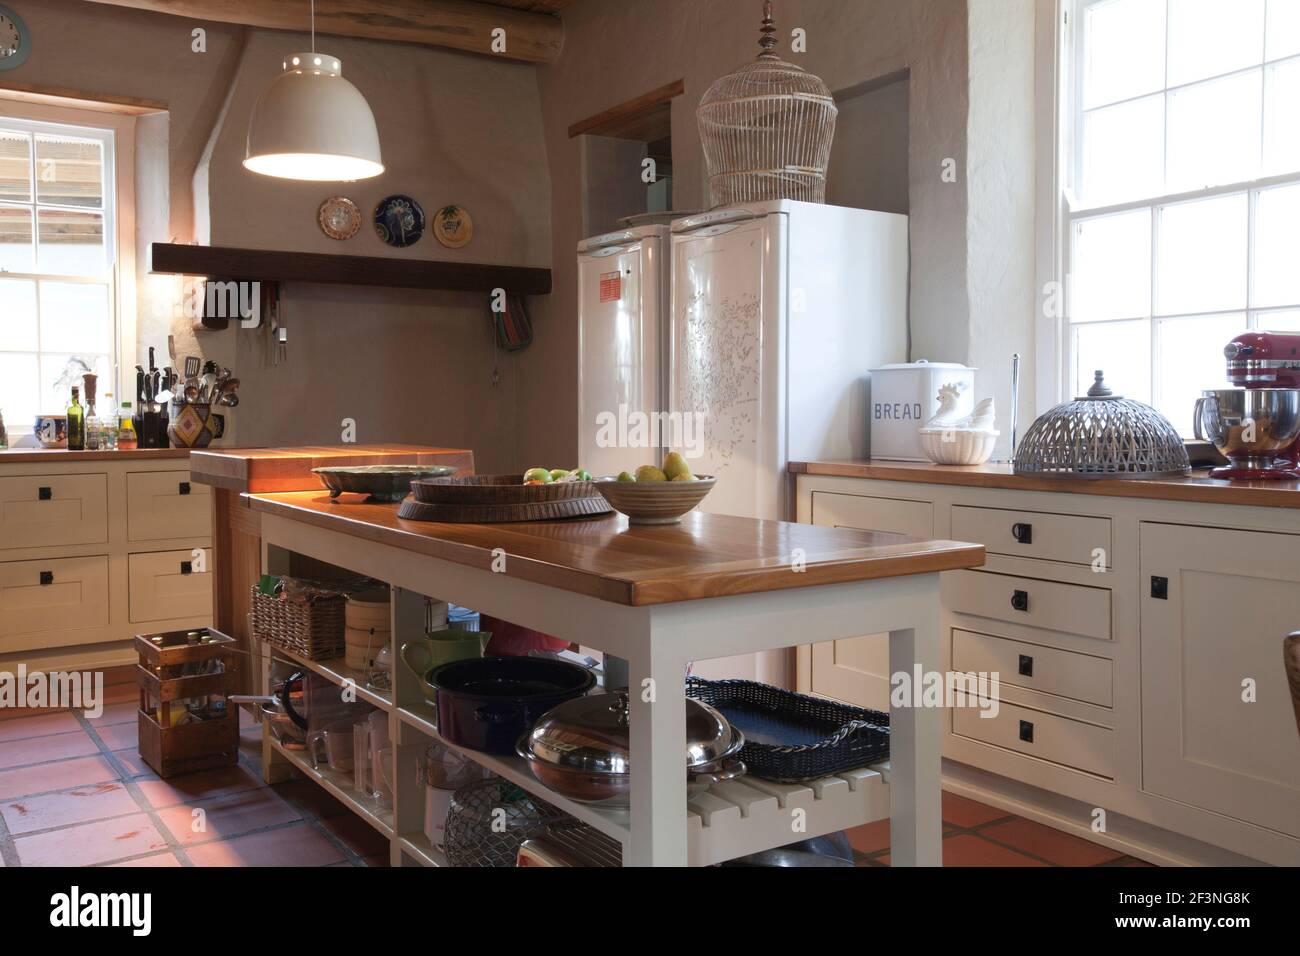 Farm style kitchen with wooden island displaying various pots Stock Photo